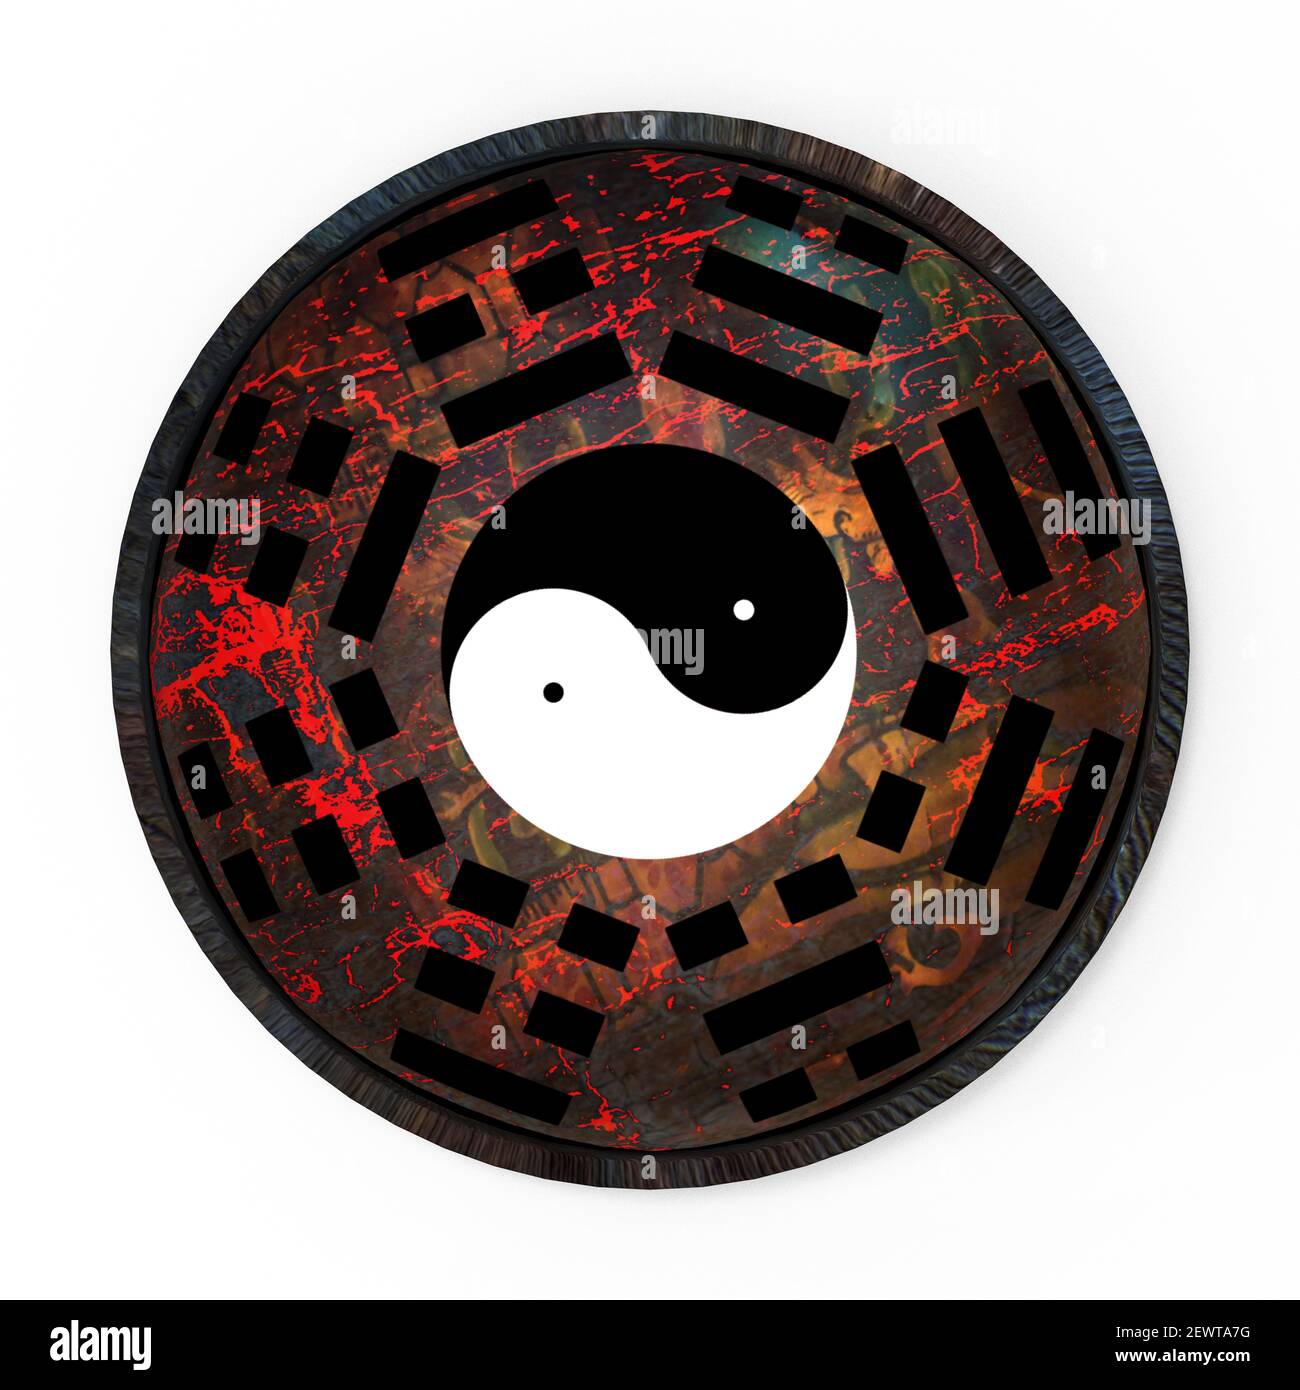 The 3d rendering of yin and yang symbol with bagua arrangement Stock Photo